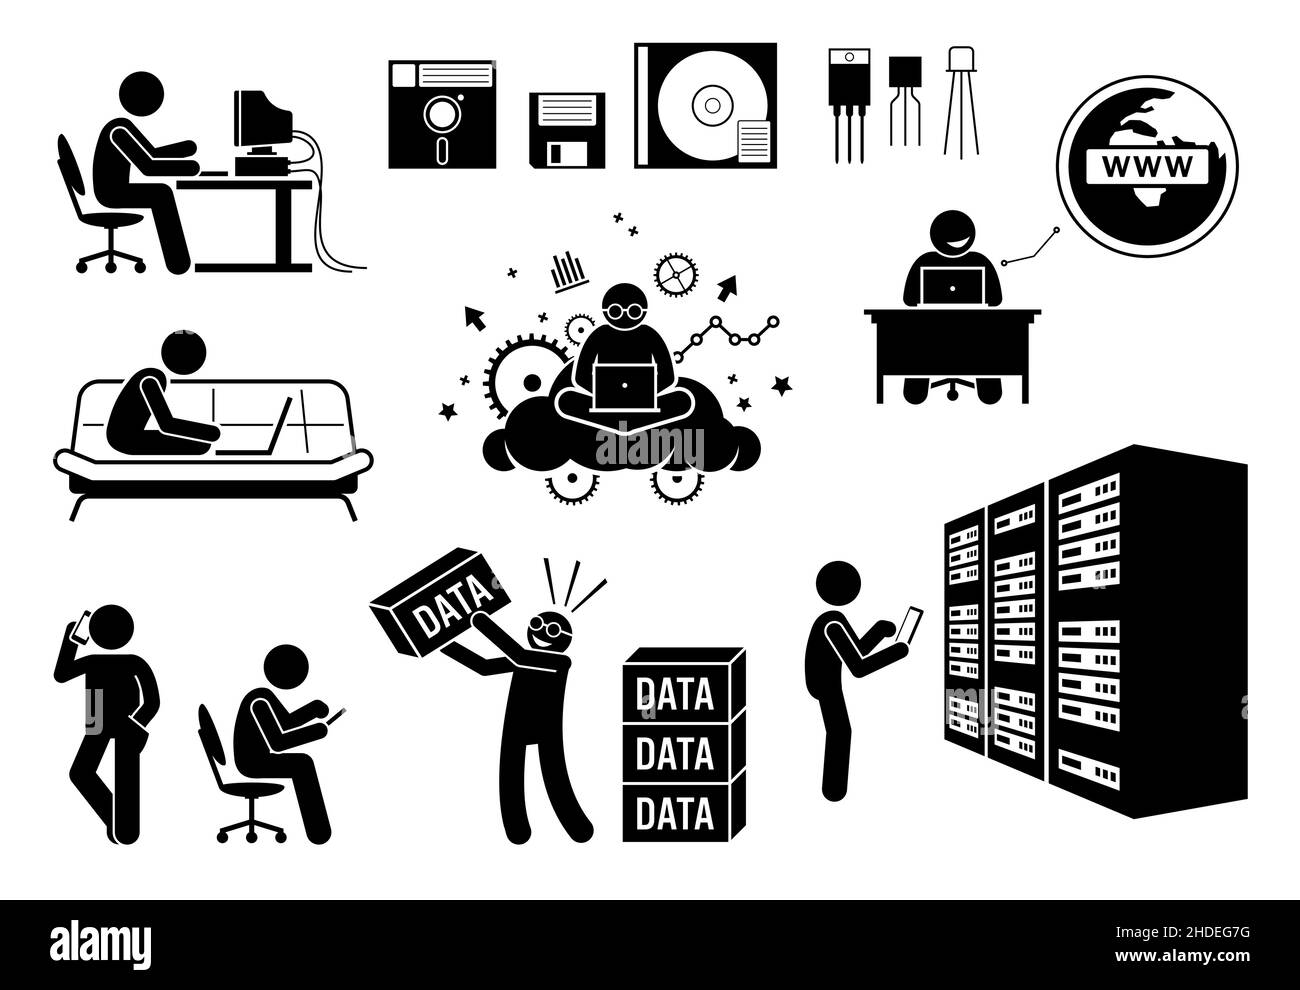 Modern History Information Age, Multimedia Age, and Social Age. Vector illustrations depict old diskette, transistor, people using computer, surfing I Stock Vector